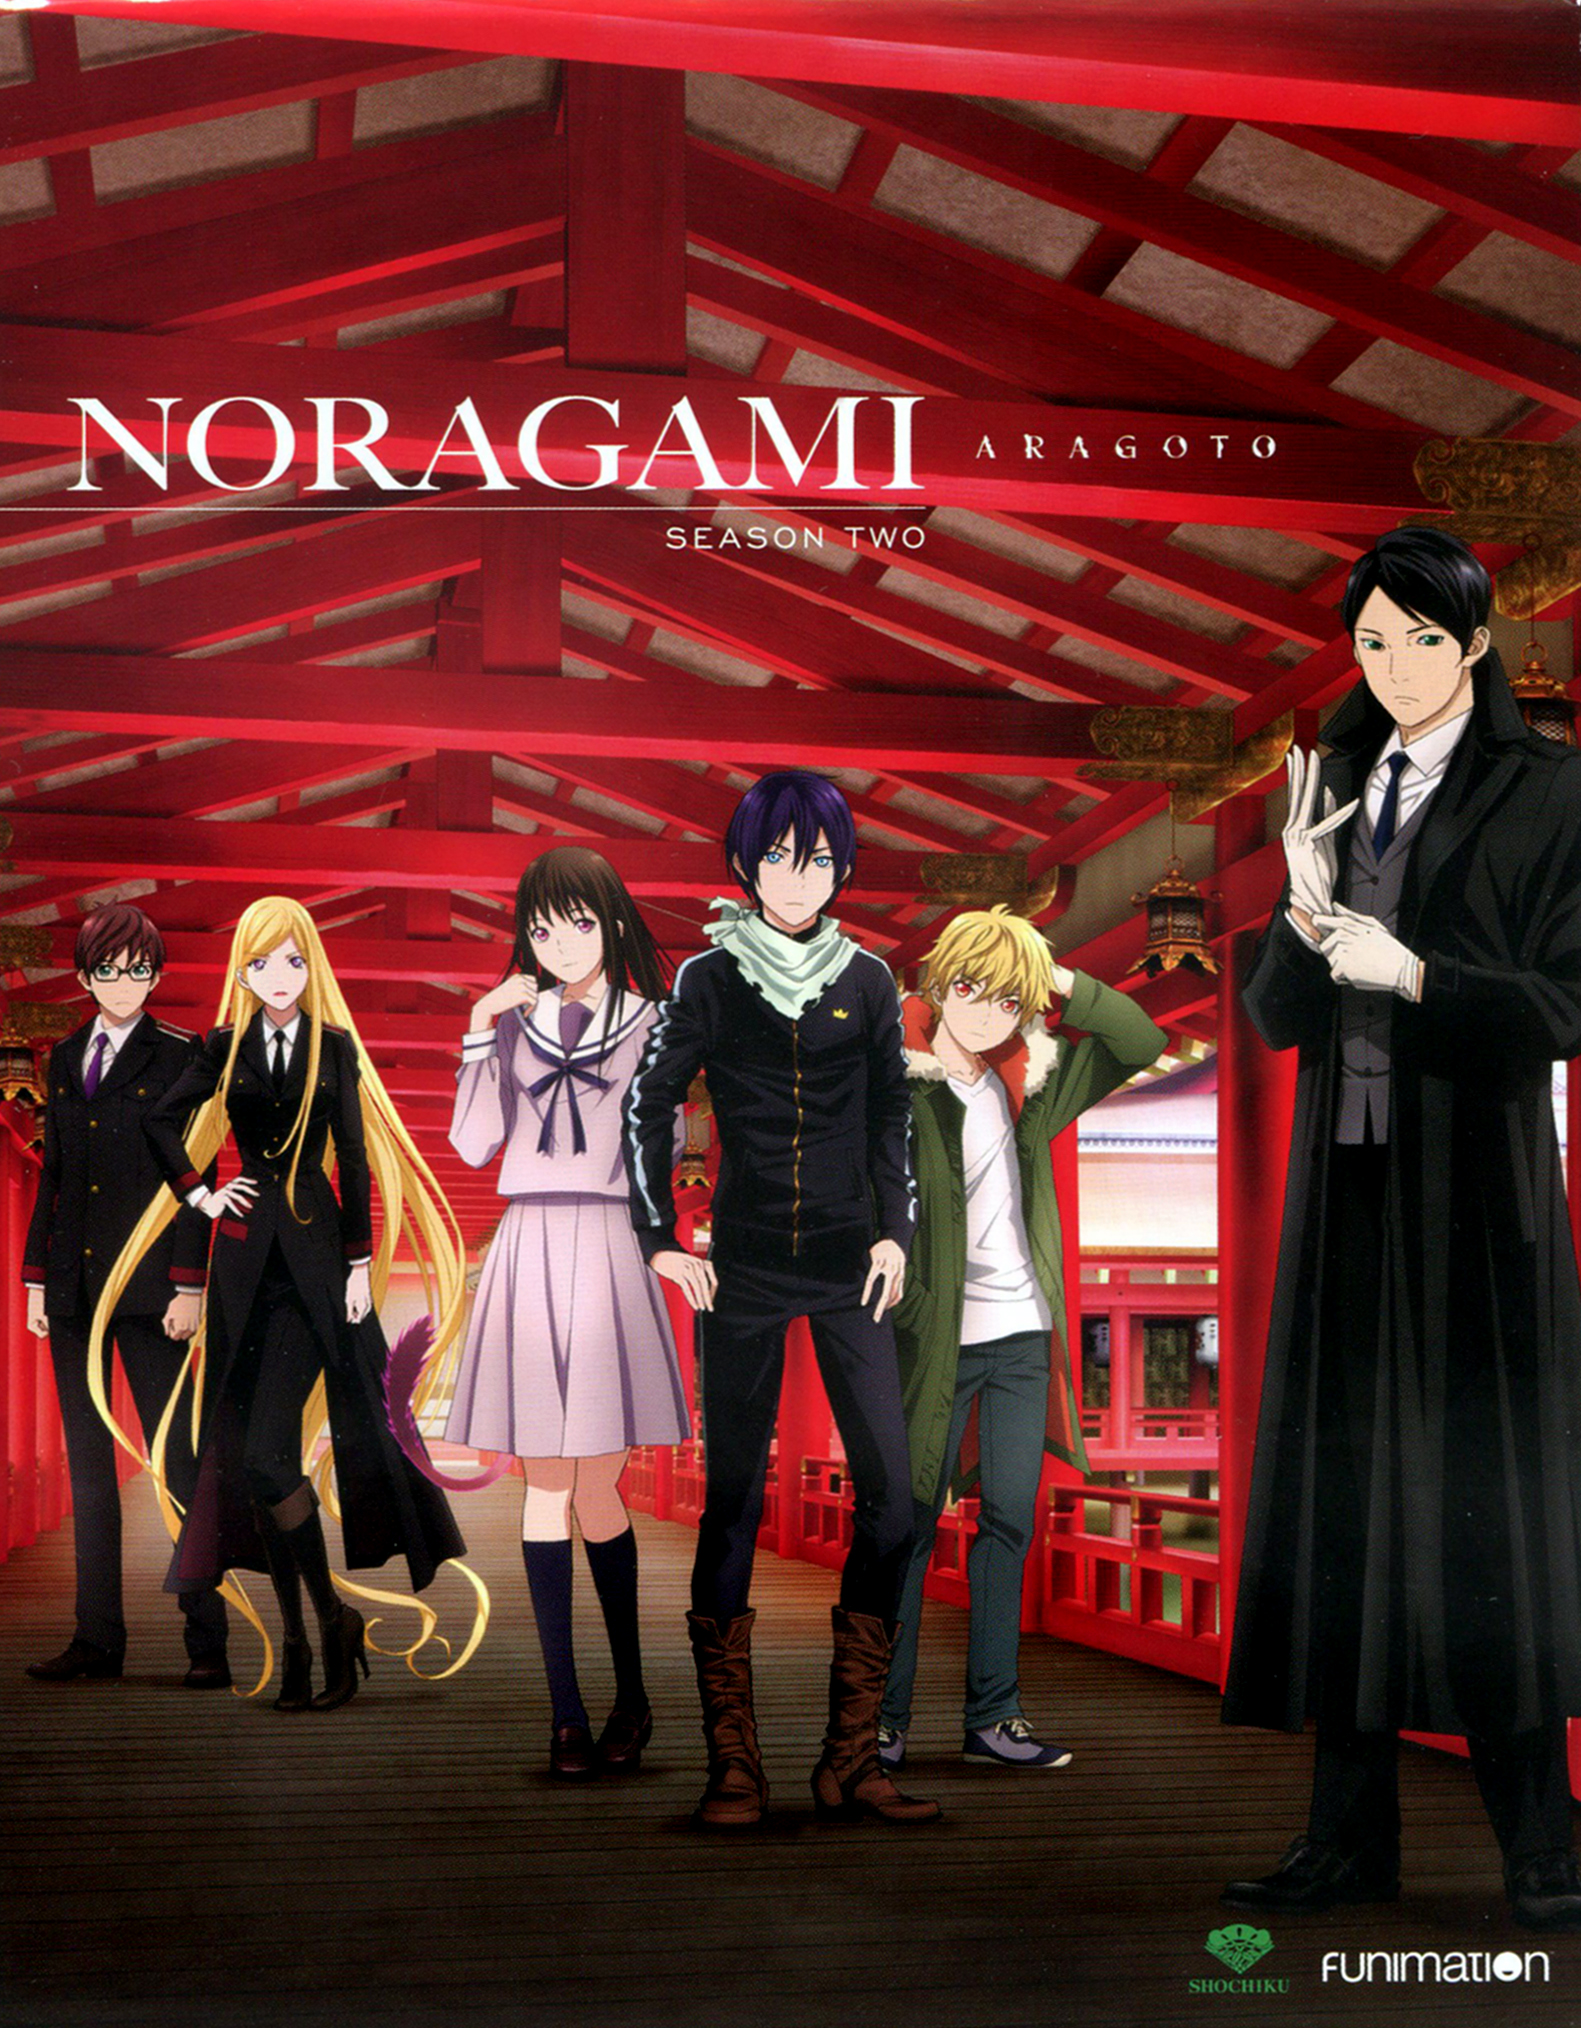 Noragami Aragoto S2 - Currently, I'm watching the 2nd season of this anime  and it's still ongoing.. I've waited for 3 years since the season 1 started  at the year 2010 and